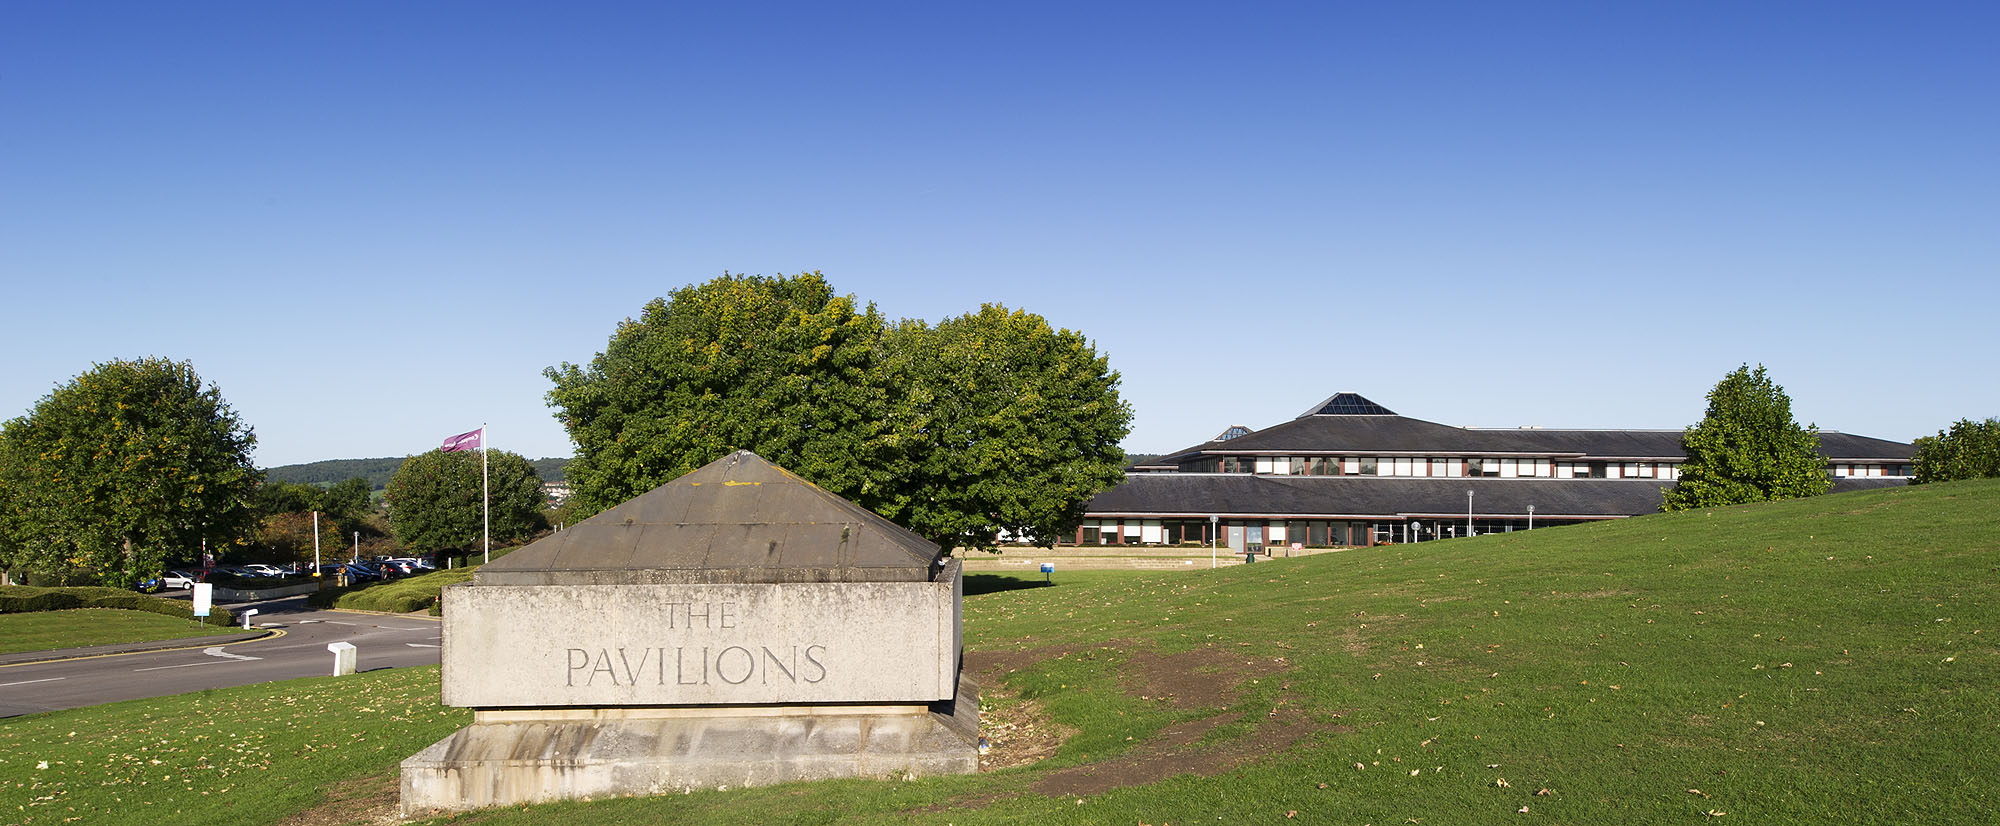 Landscape at the former CEGB Headquarters. Approach sign bearing the name 'The Pavilions' in the foreground.